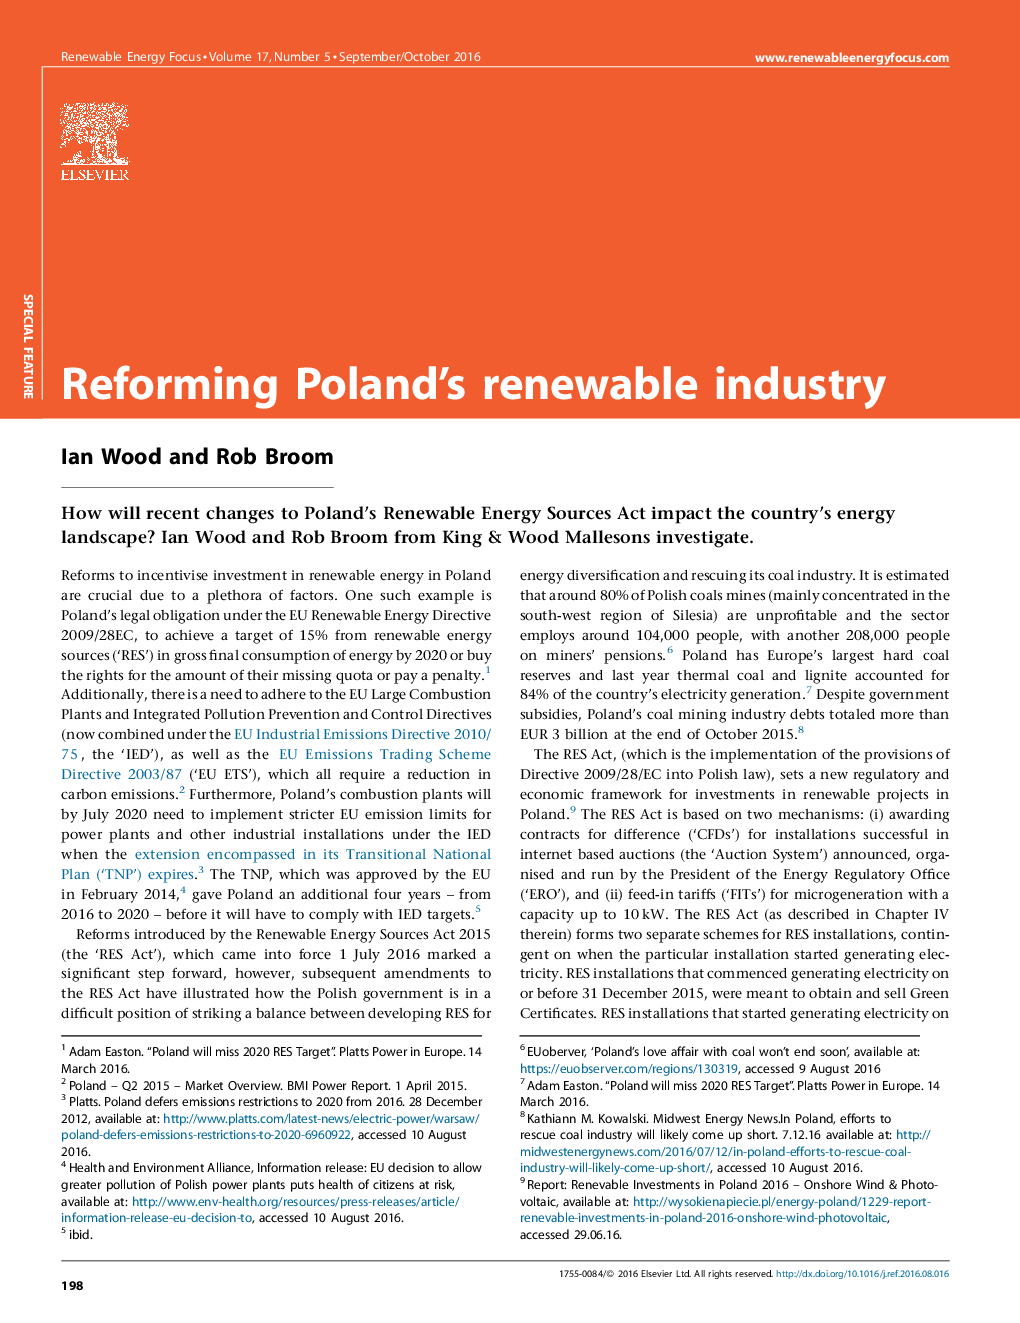 Reforming Poland's renewable industry